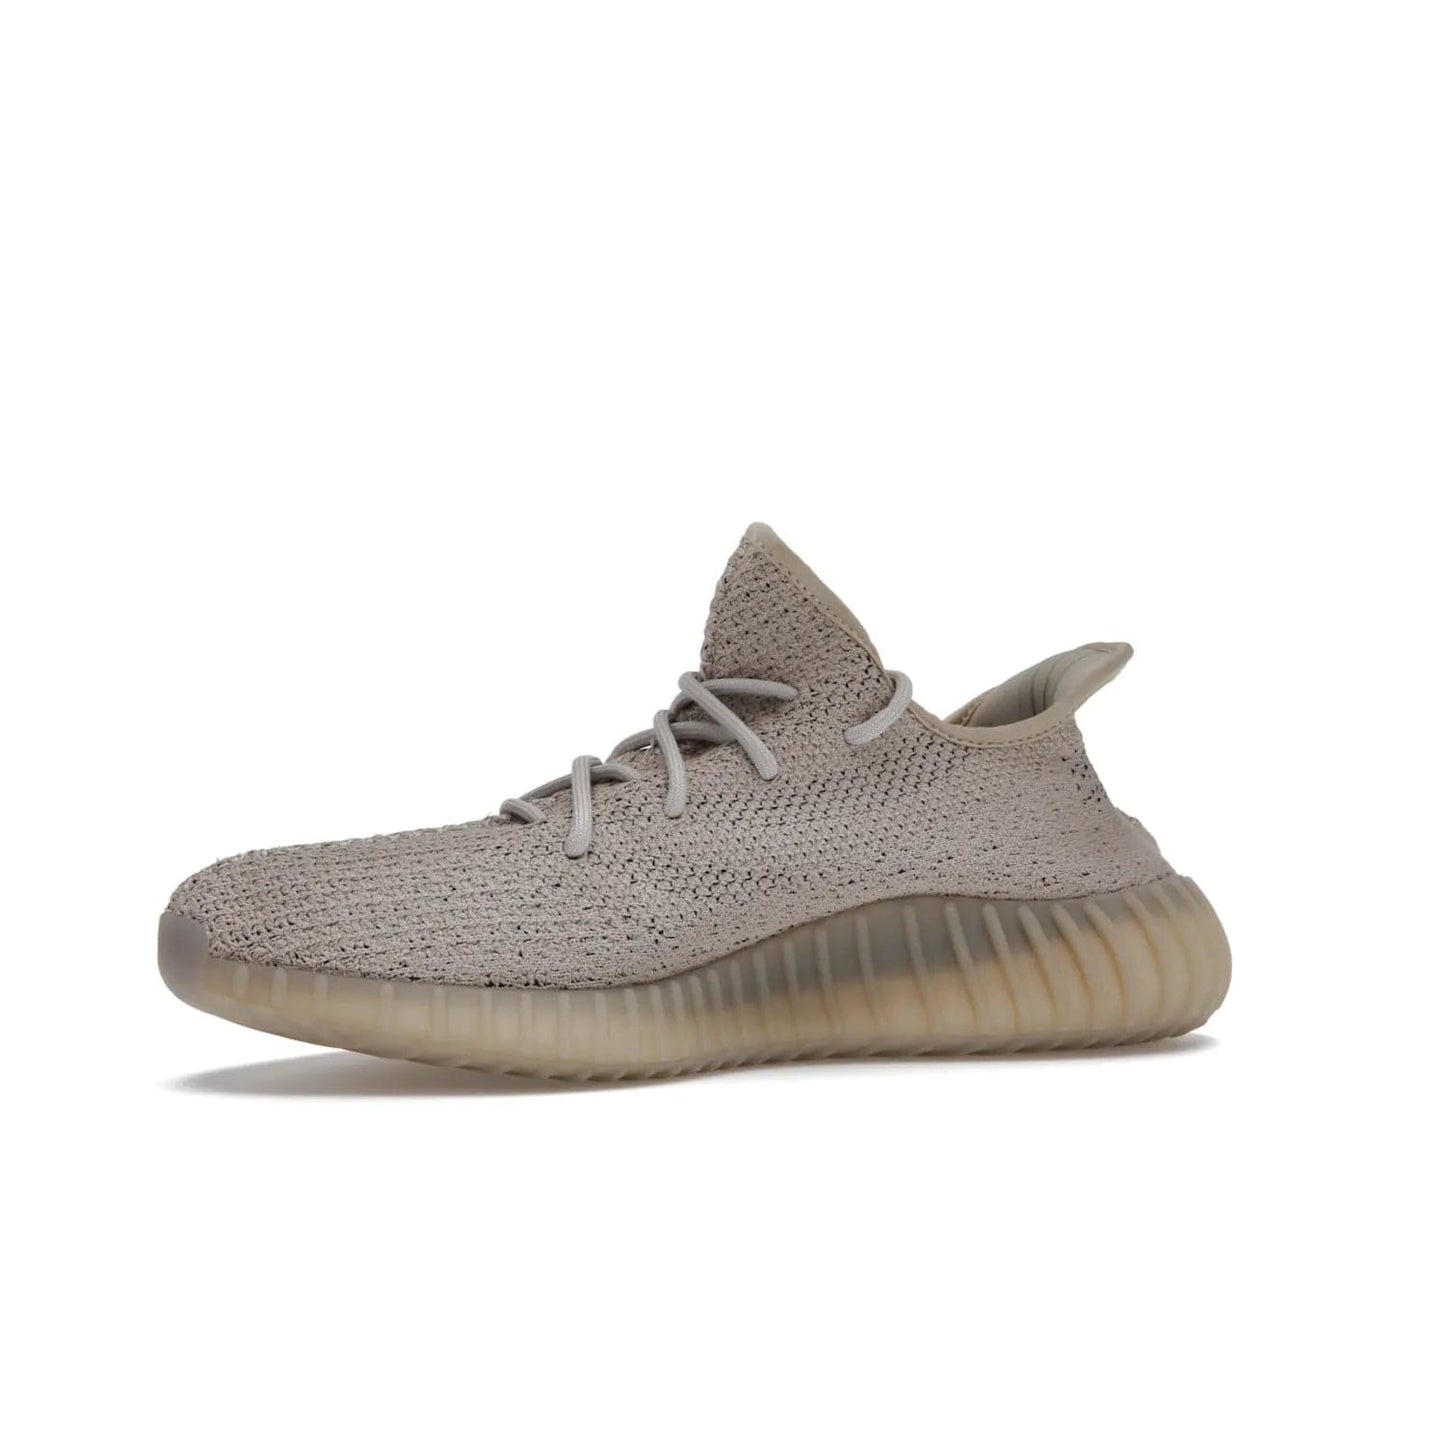 adidas Yeezy Boost 350 V2 Slate - Image 17 - Only at www.BallersClubKickz.com - Adidas Yeezy Boost 350 V2 Slate Core Black Slate featuring Primeknit upper, Boost midsole and semi-translucent TPU cage. Launched on 3/9/2022, retailed at $230.